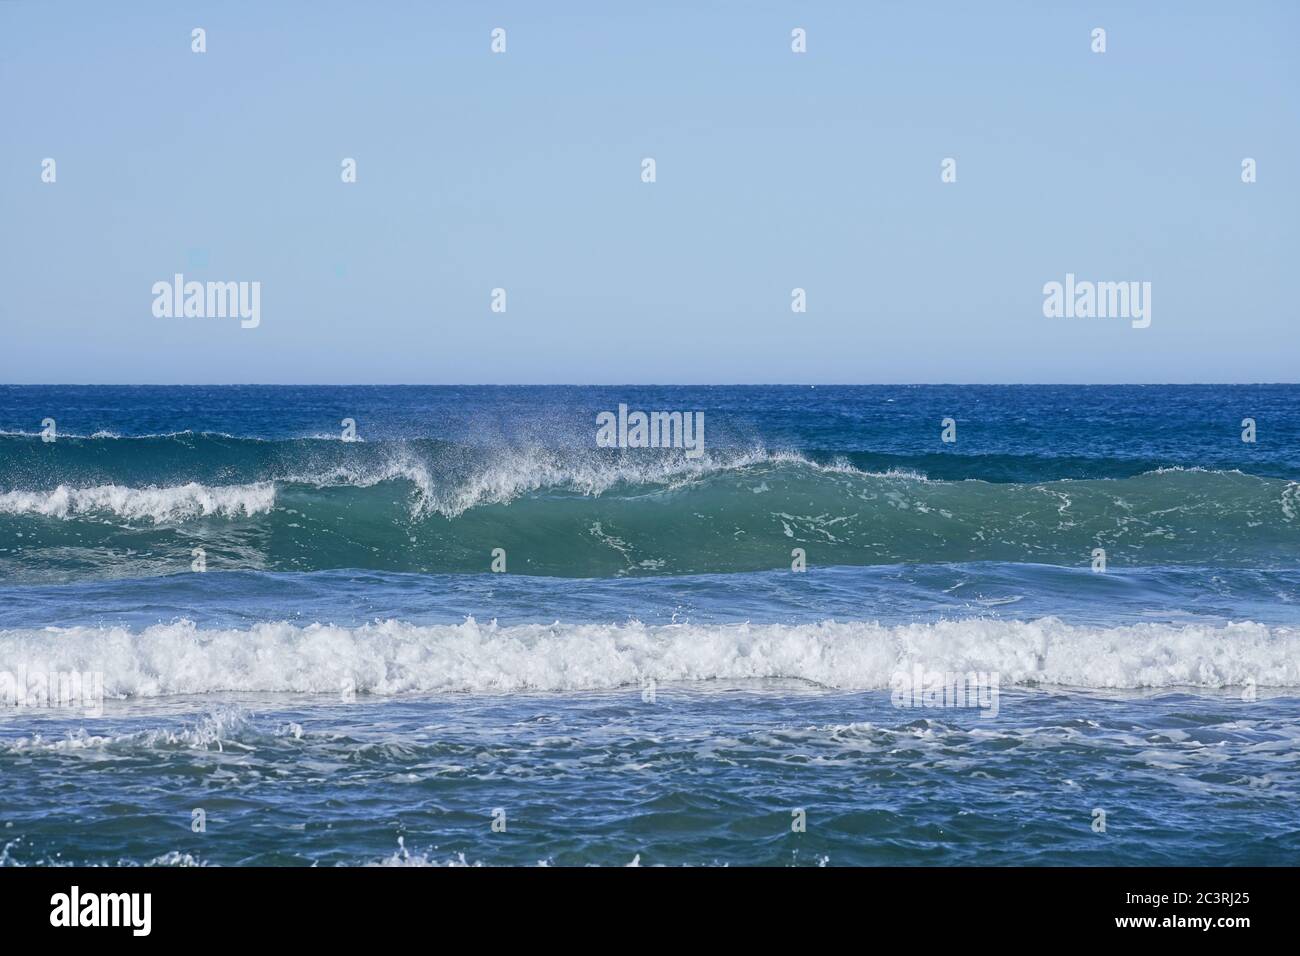 Sea wave breaking with distinctive spray blowing back from the top of the wave, blue sky above. Stock Photo